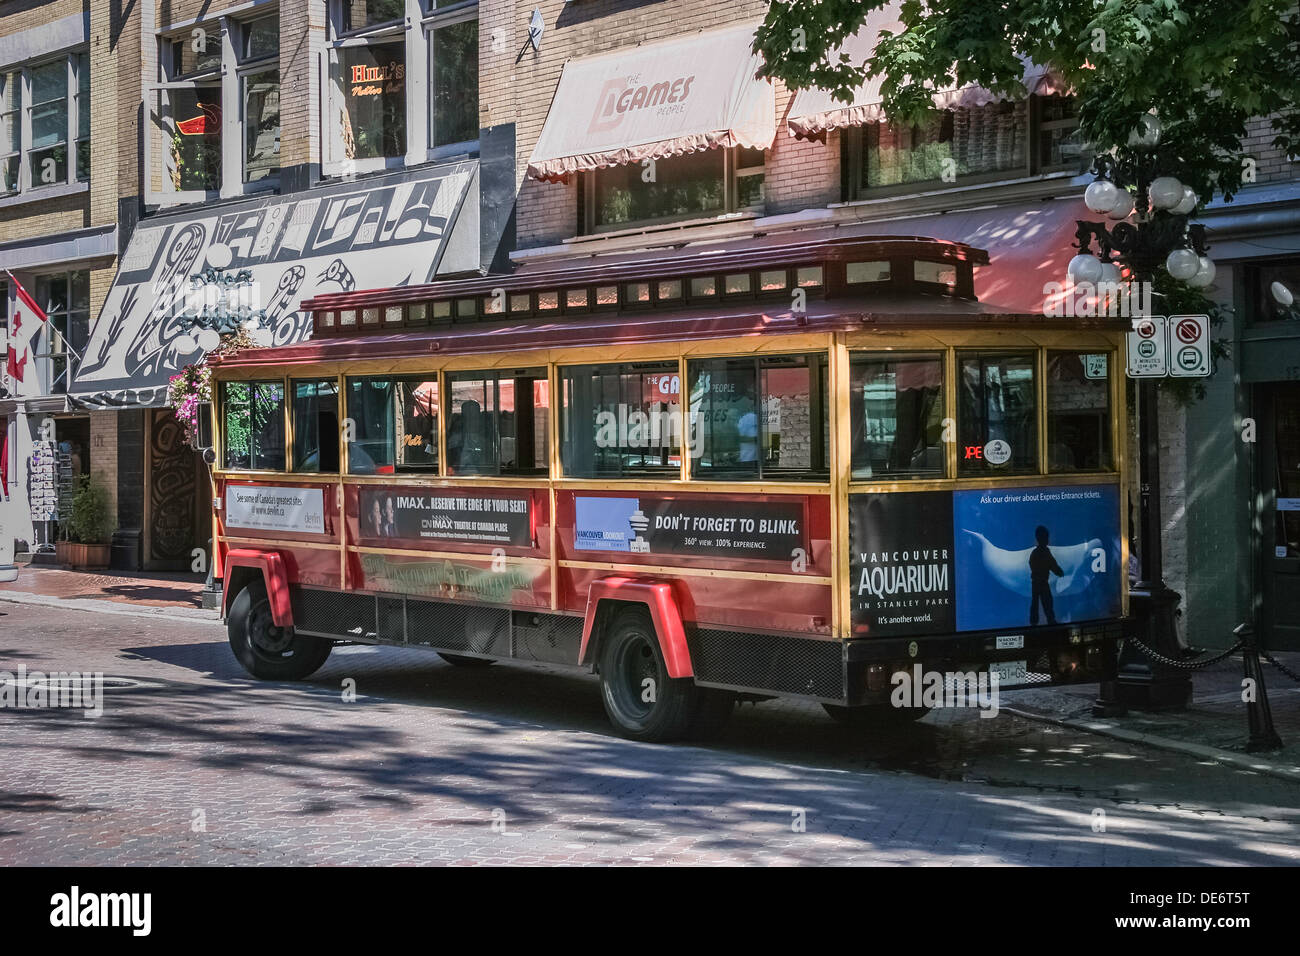 Trolley bus, Gastown, Vancouver, British Columbia, Canada Stock Photo